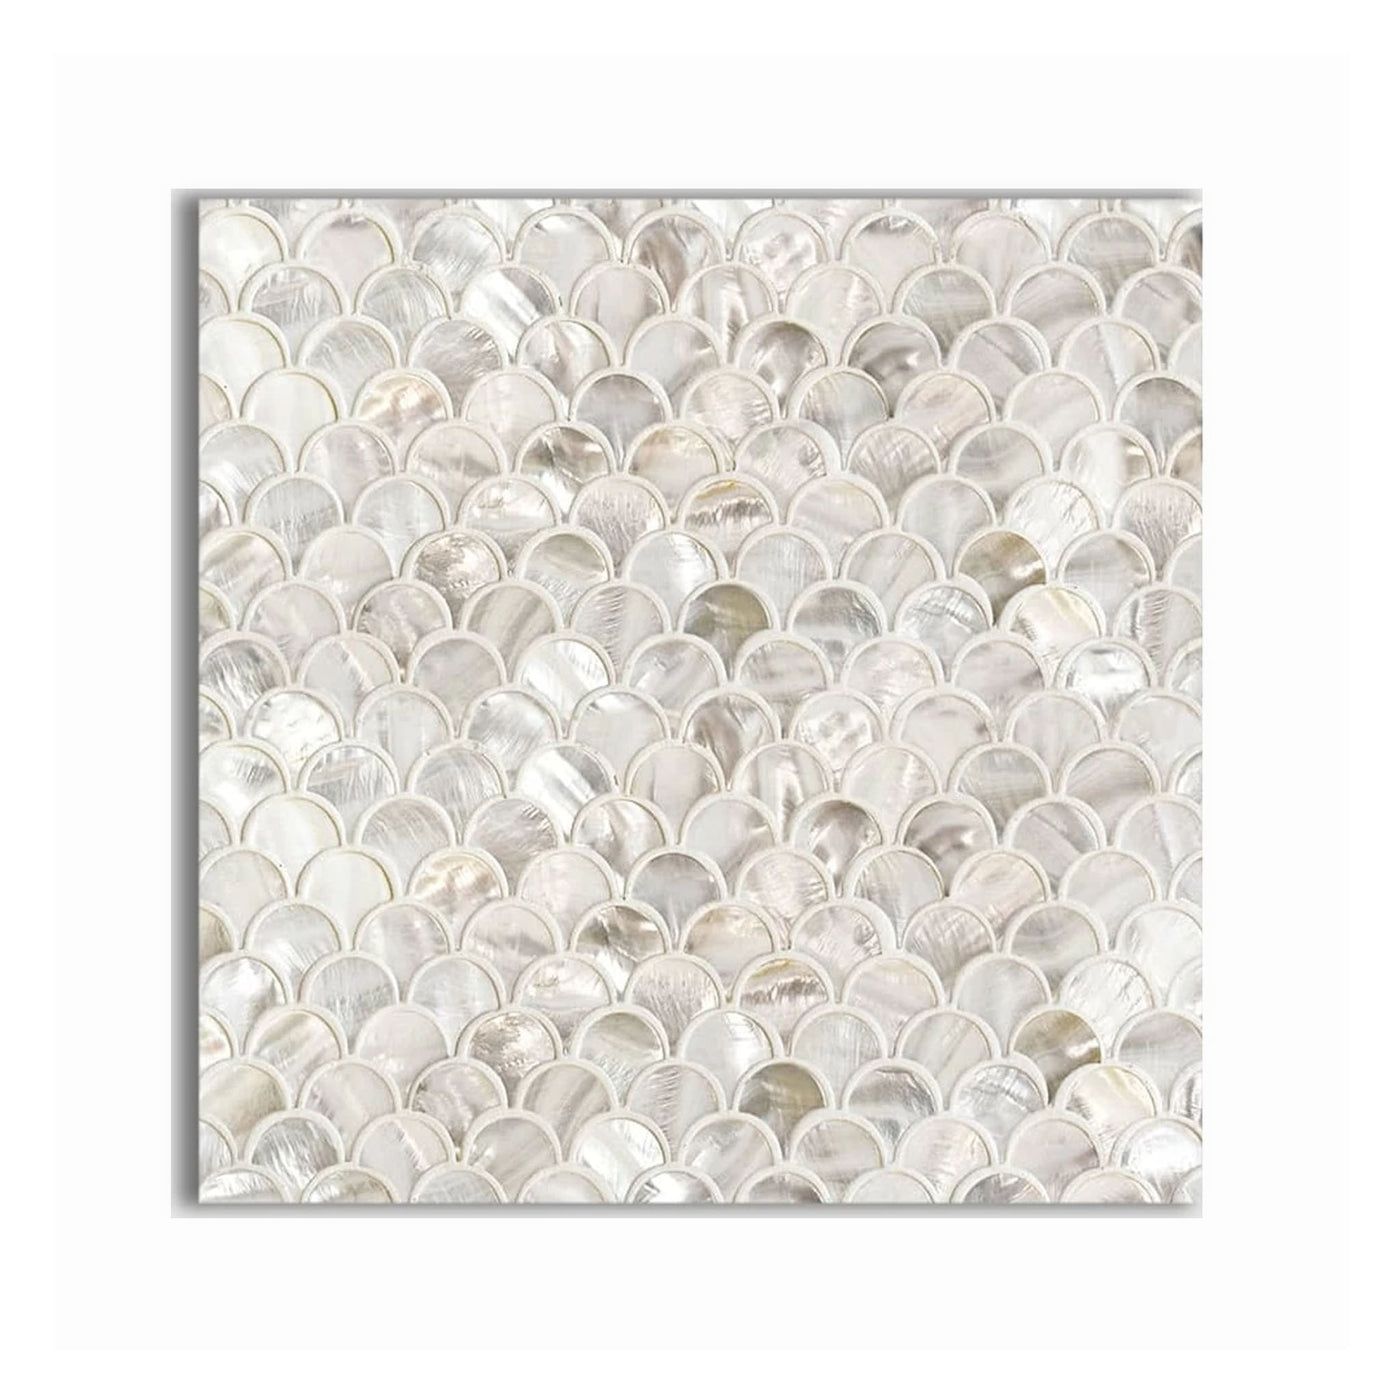 12" x 12" Mother Of Pearl Polished Scallop Iridescent Shell Mosaic